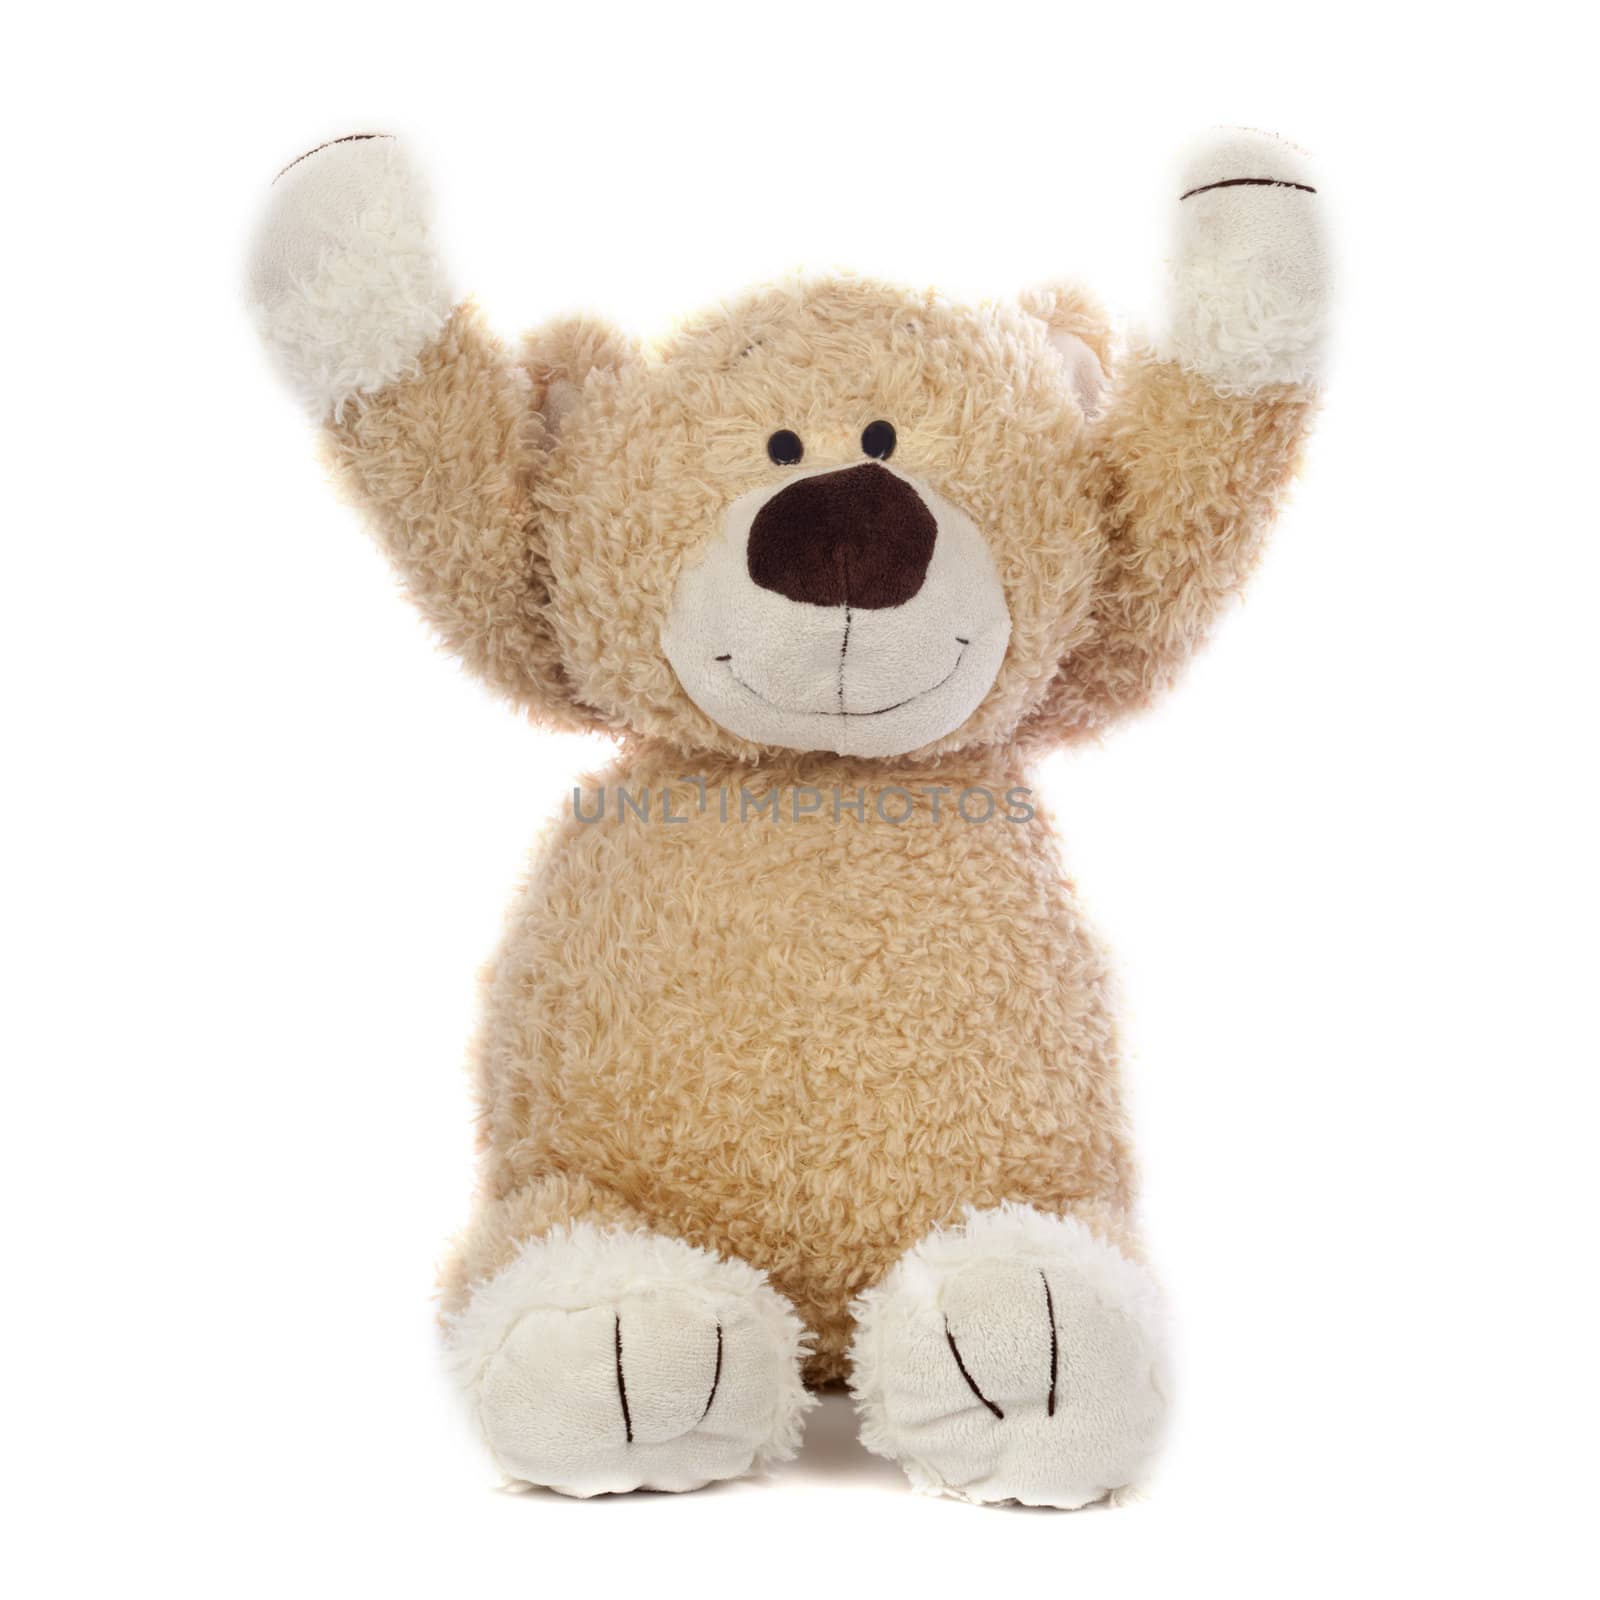 An adorable teddy bear that is happy. Isolated on a white background.